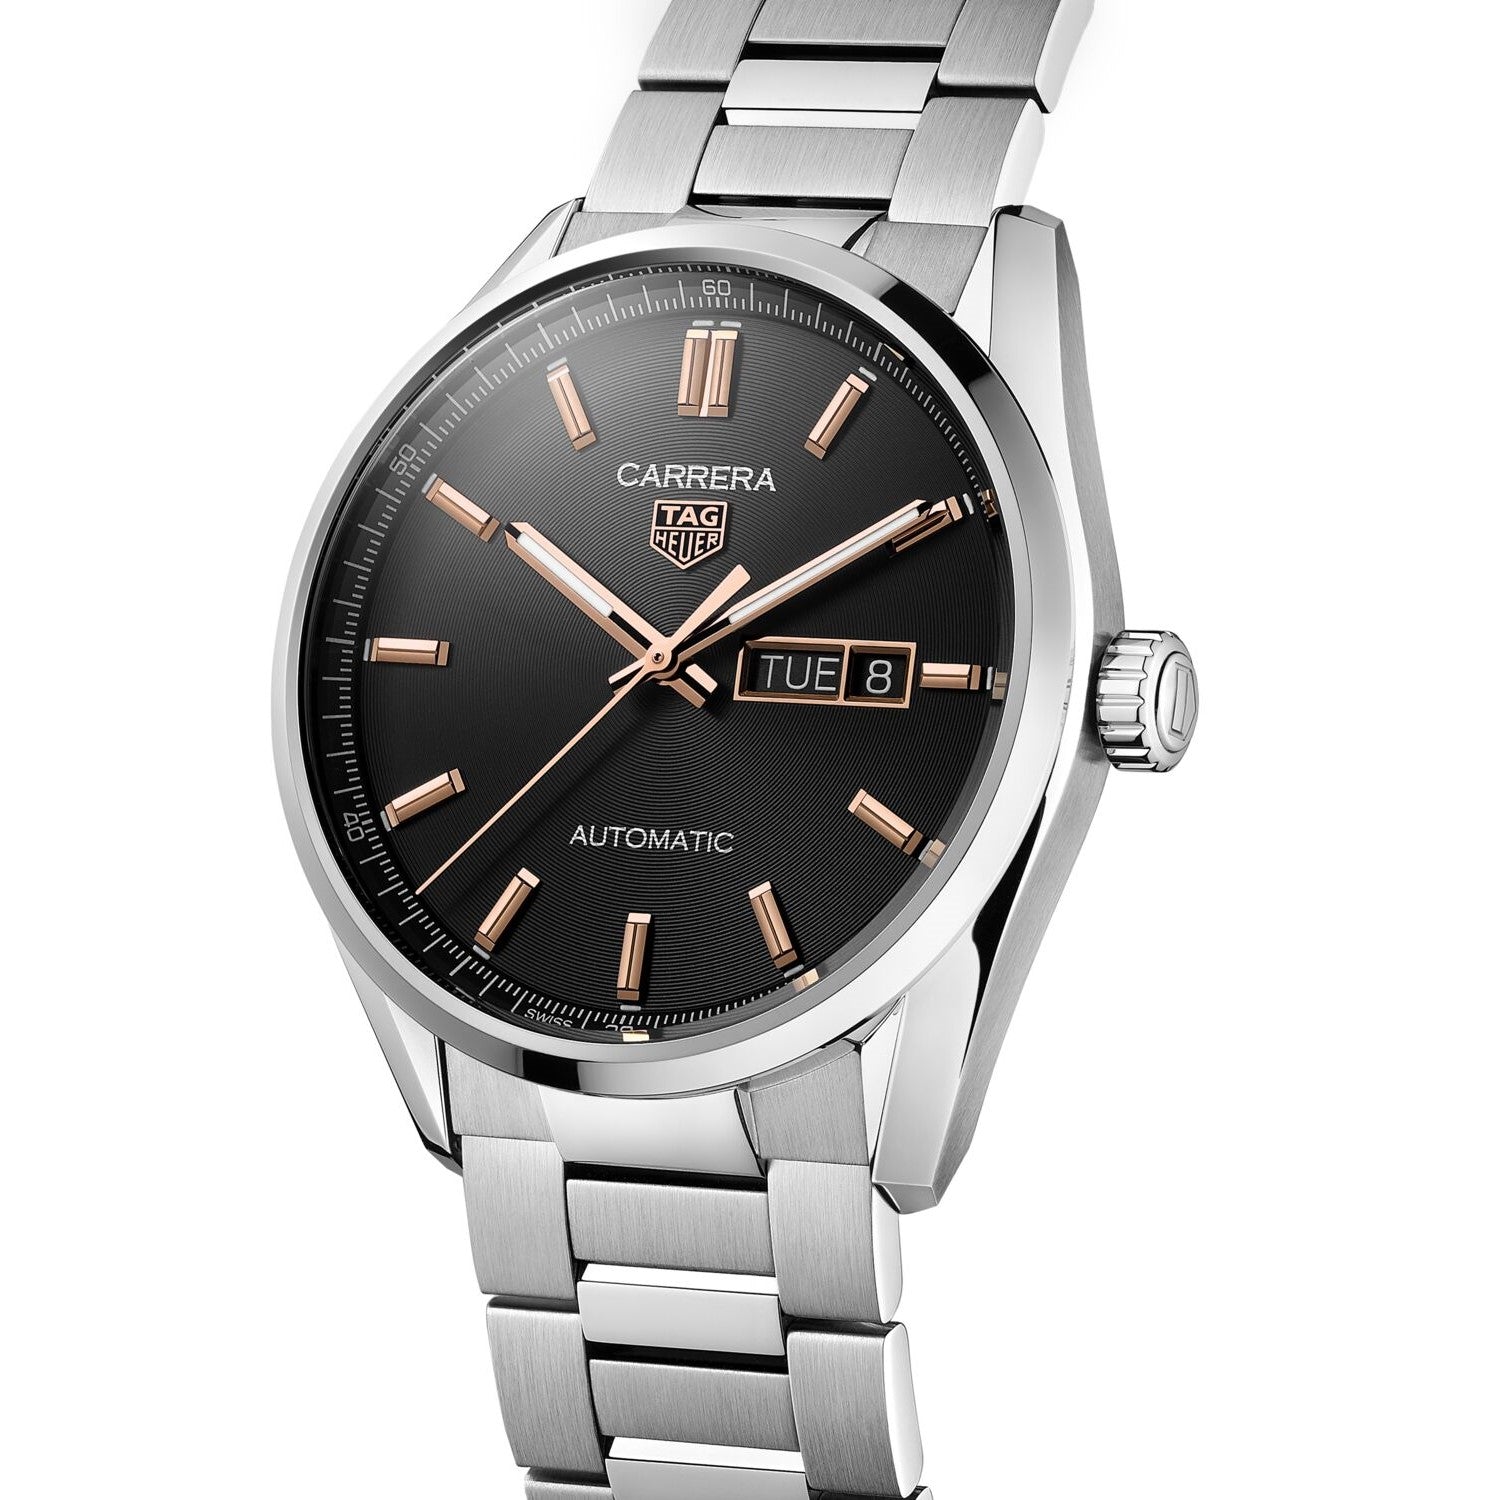 TAG Heuer Carrera 41mm Day-Date, model #WBN2013.BA0640, at IJL Since 1937